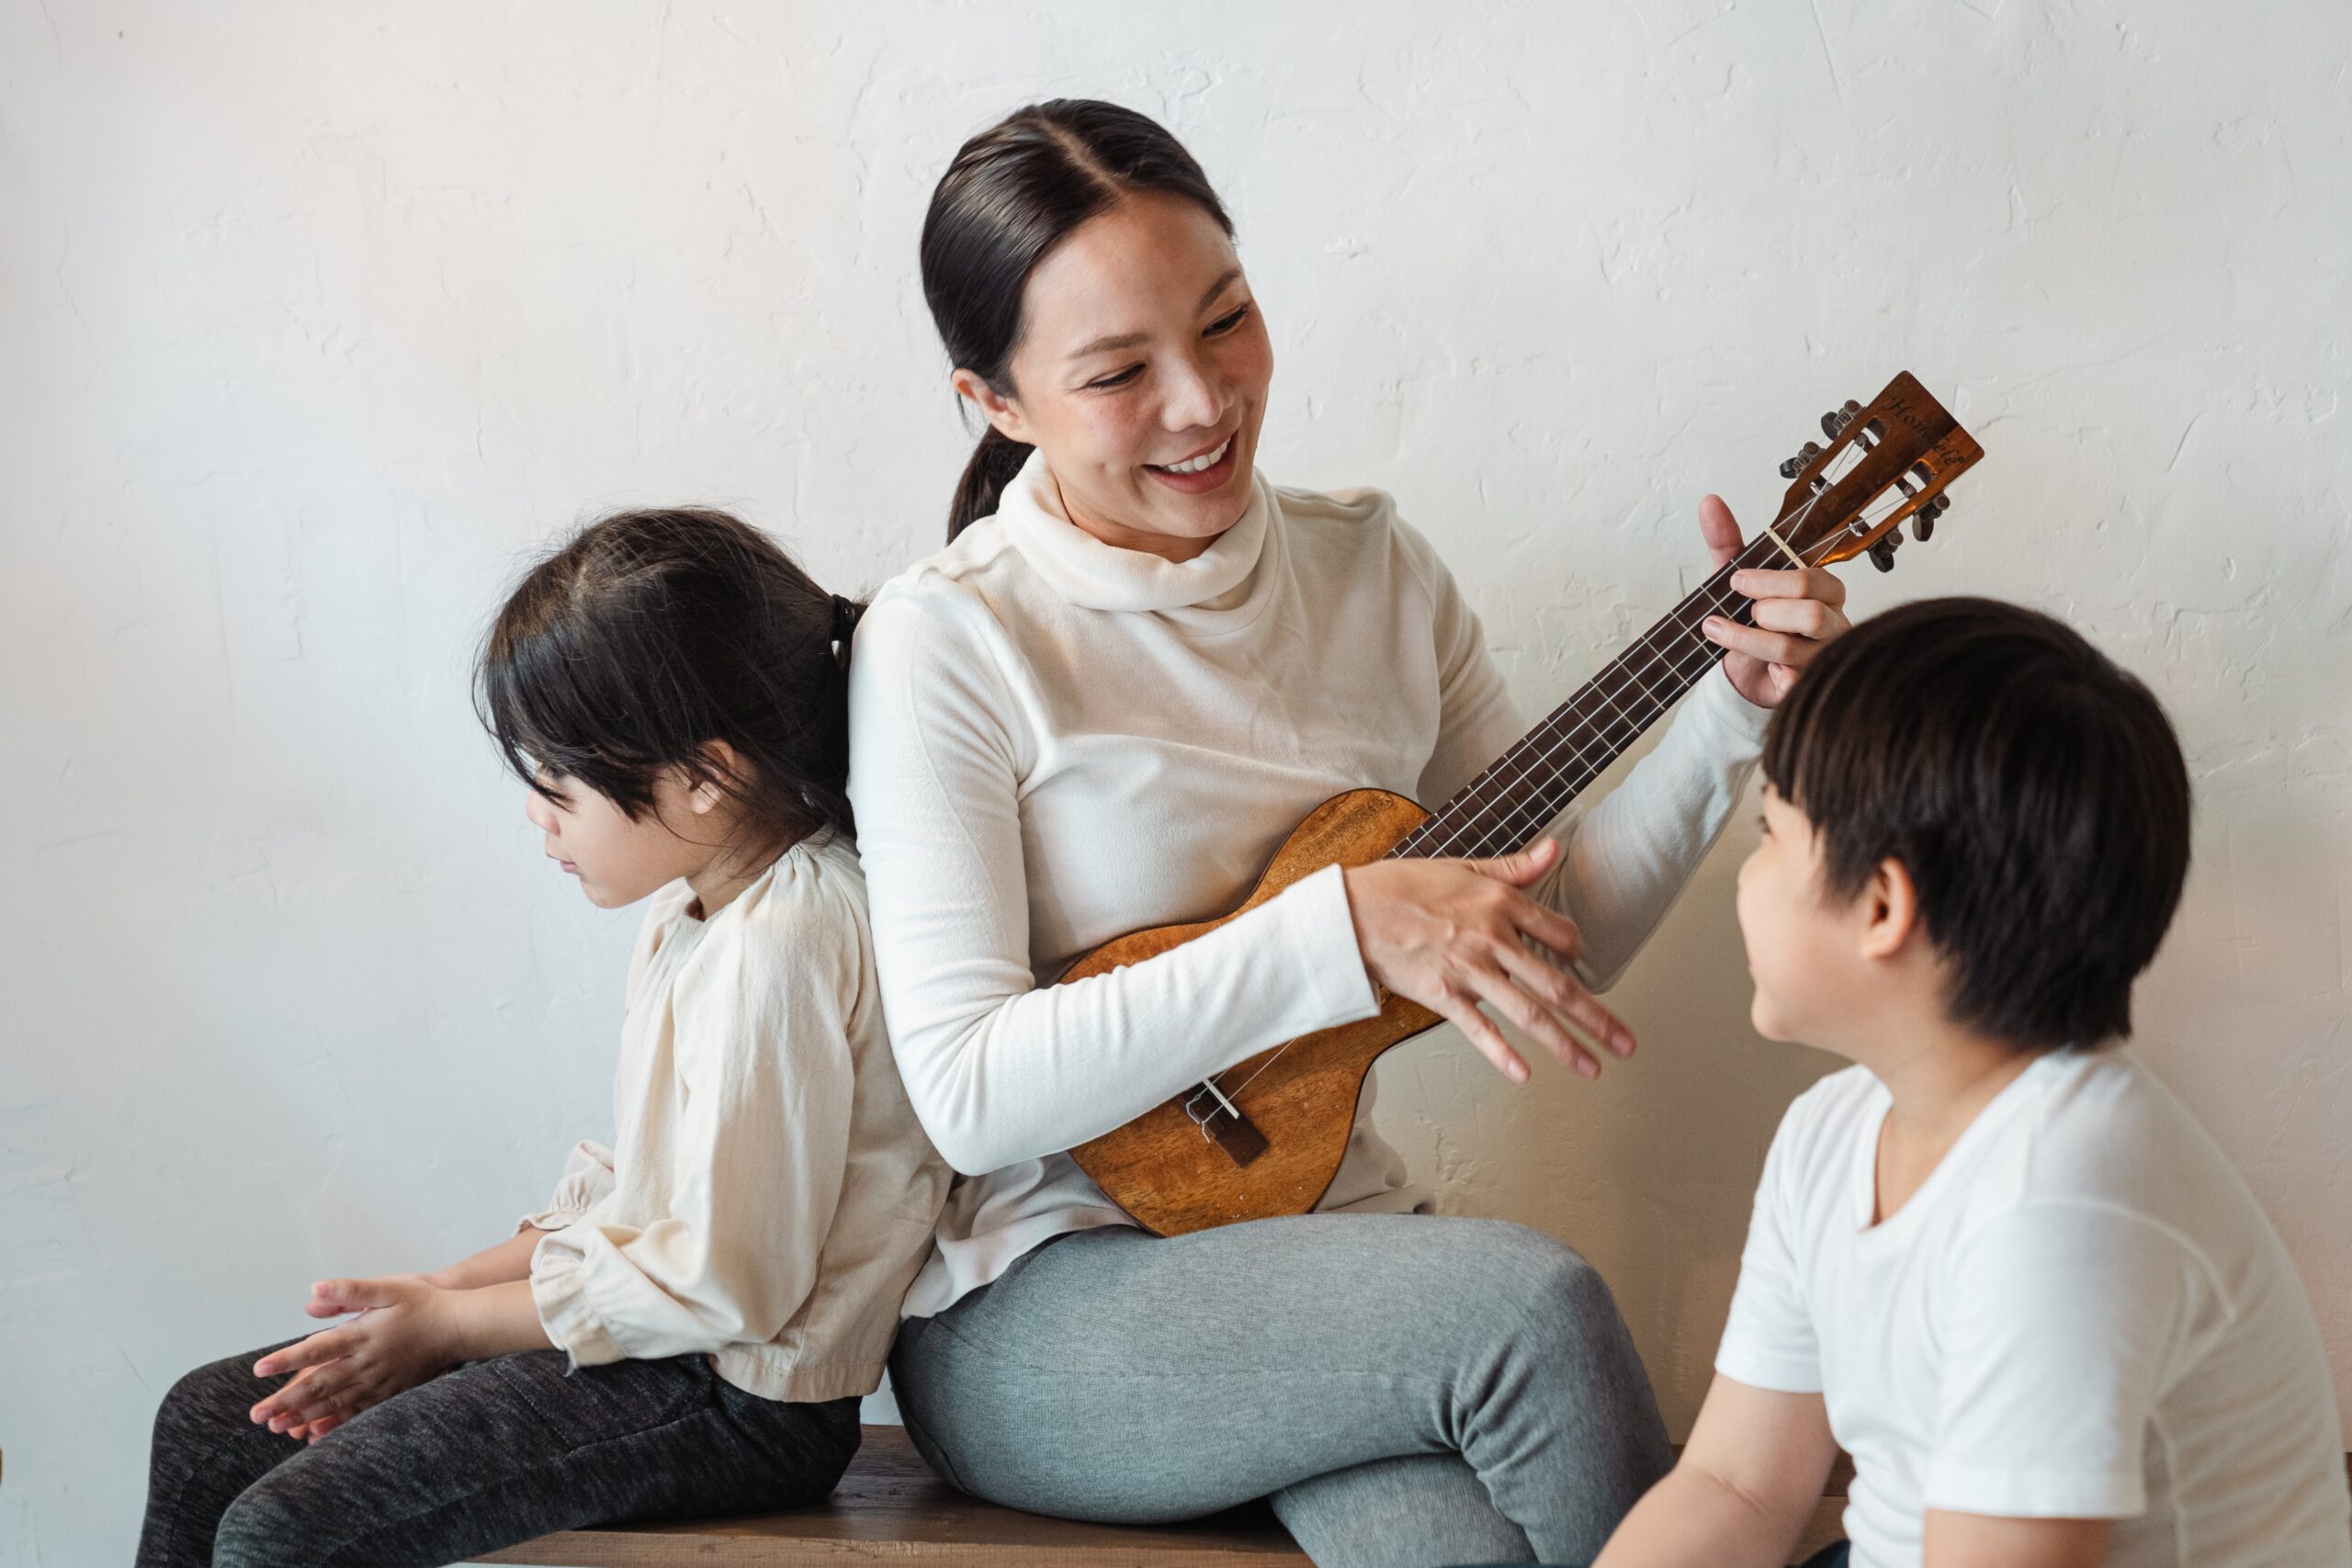 A woman playing a ukulele for her children